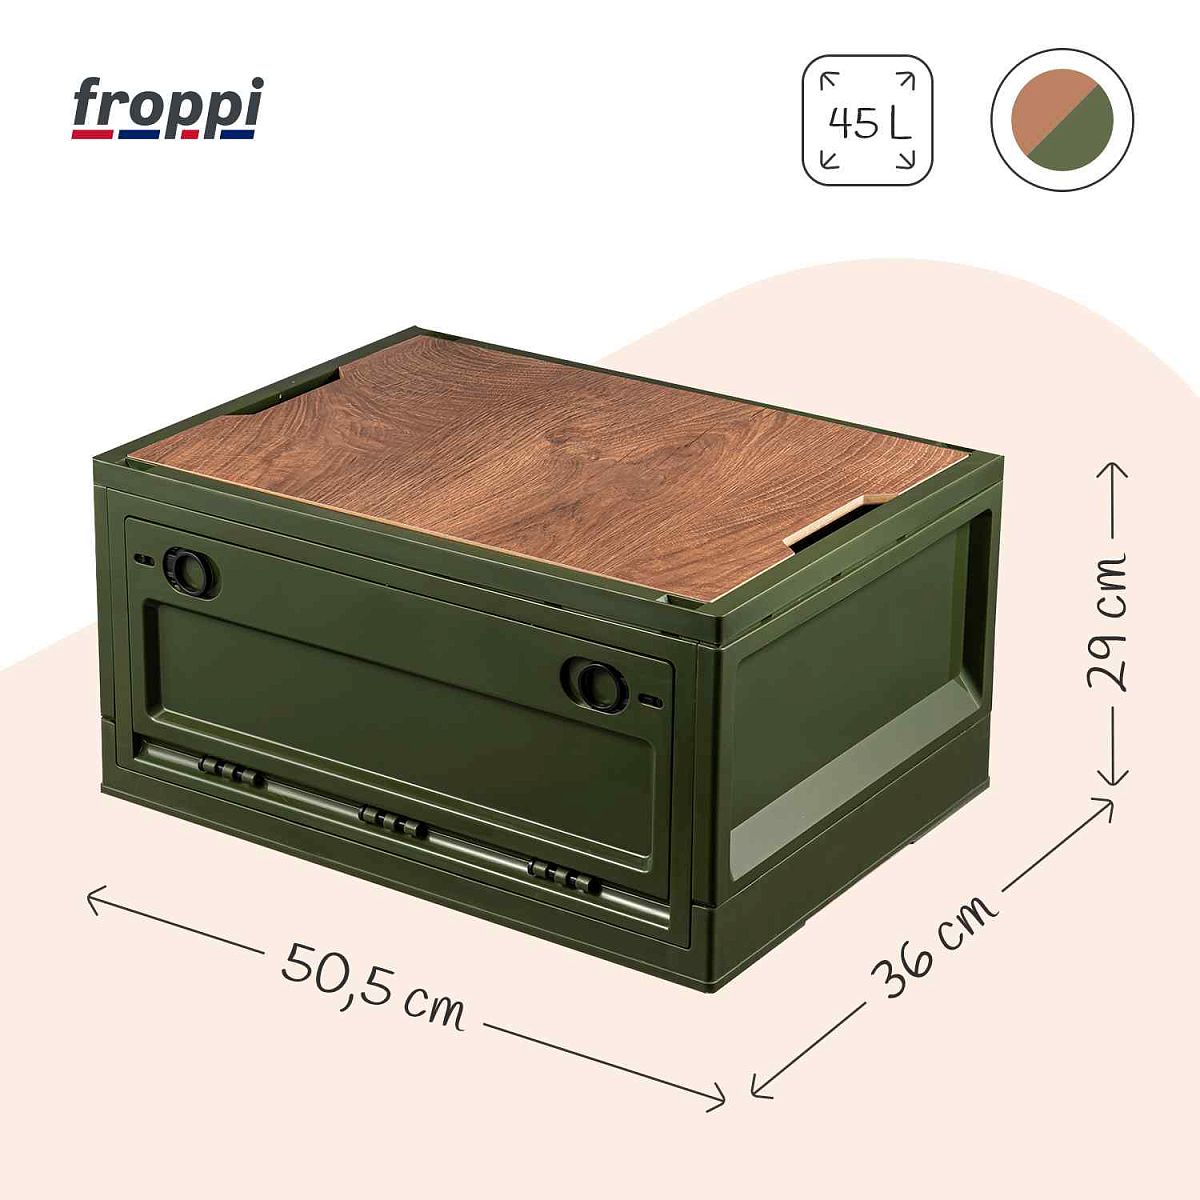 Camping Large Green Plastic Collapsible Storage Unit with Wooden Lid by Froppi